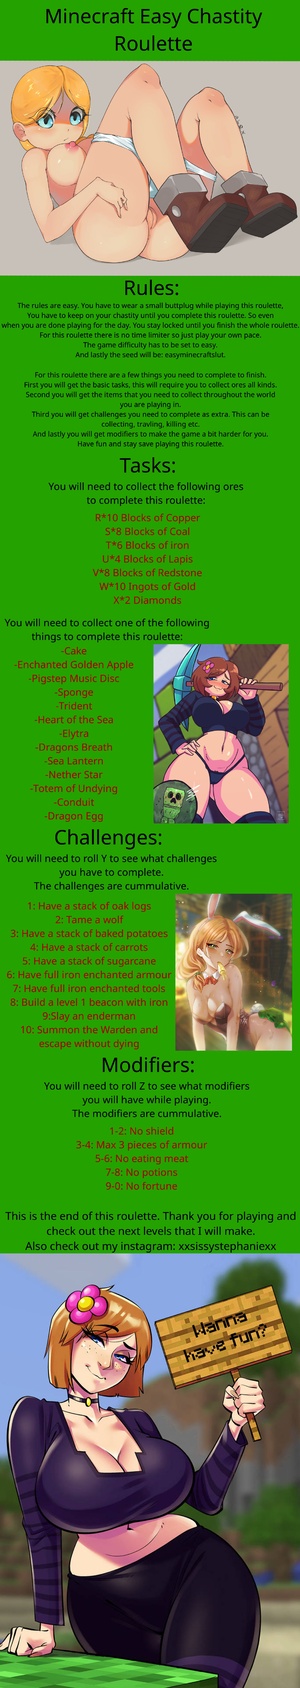 Minecraft Easy Chastity Roulette